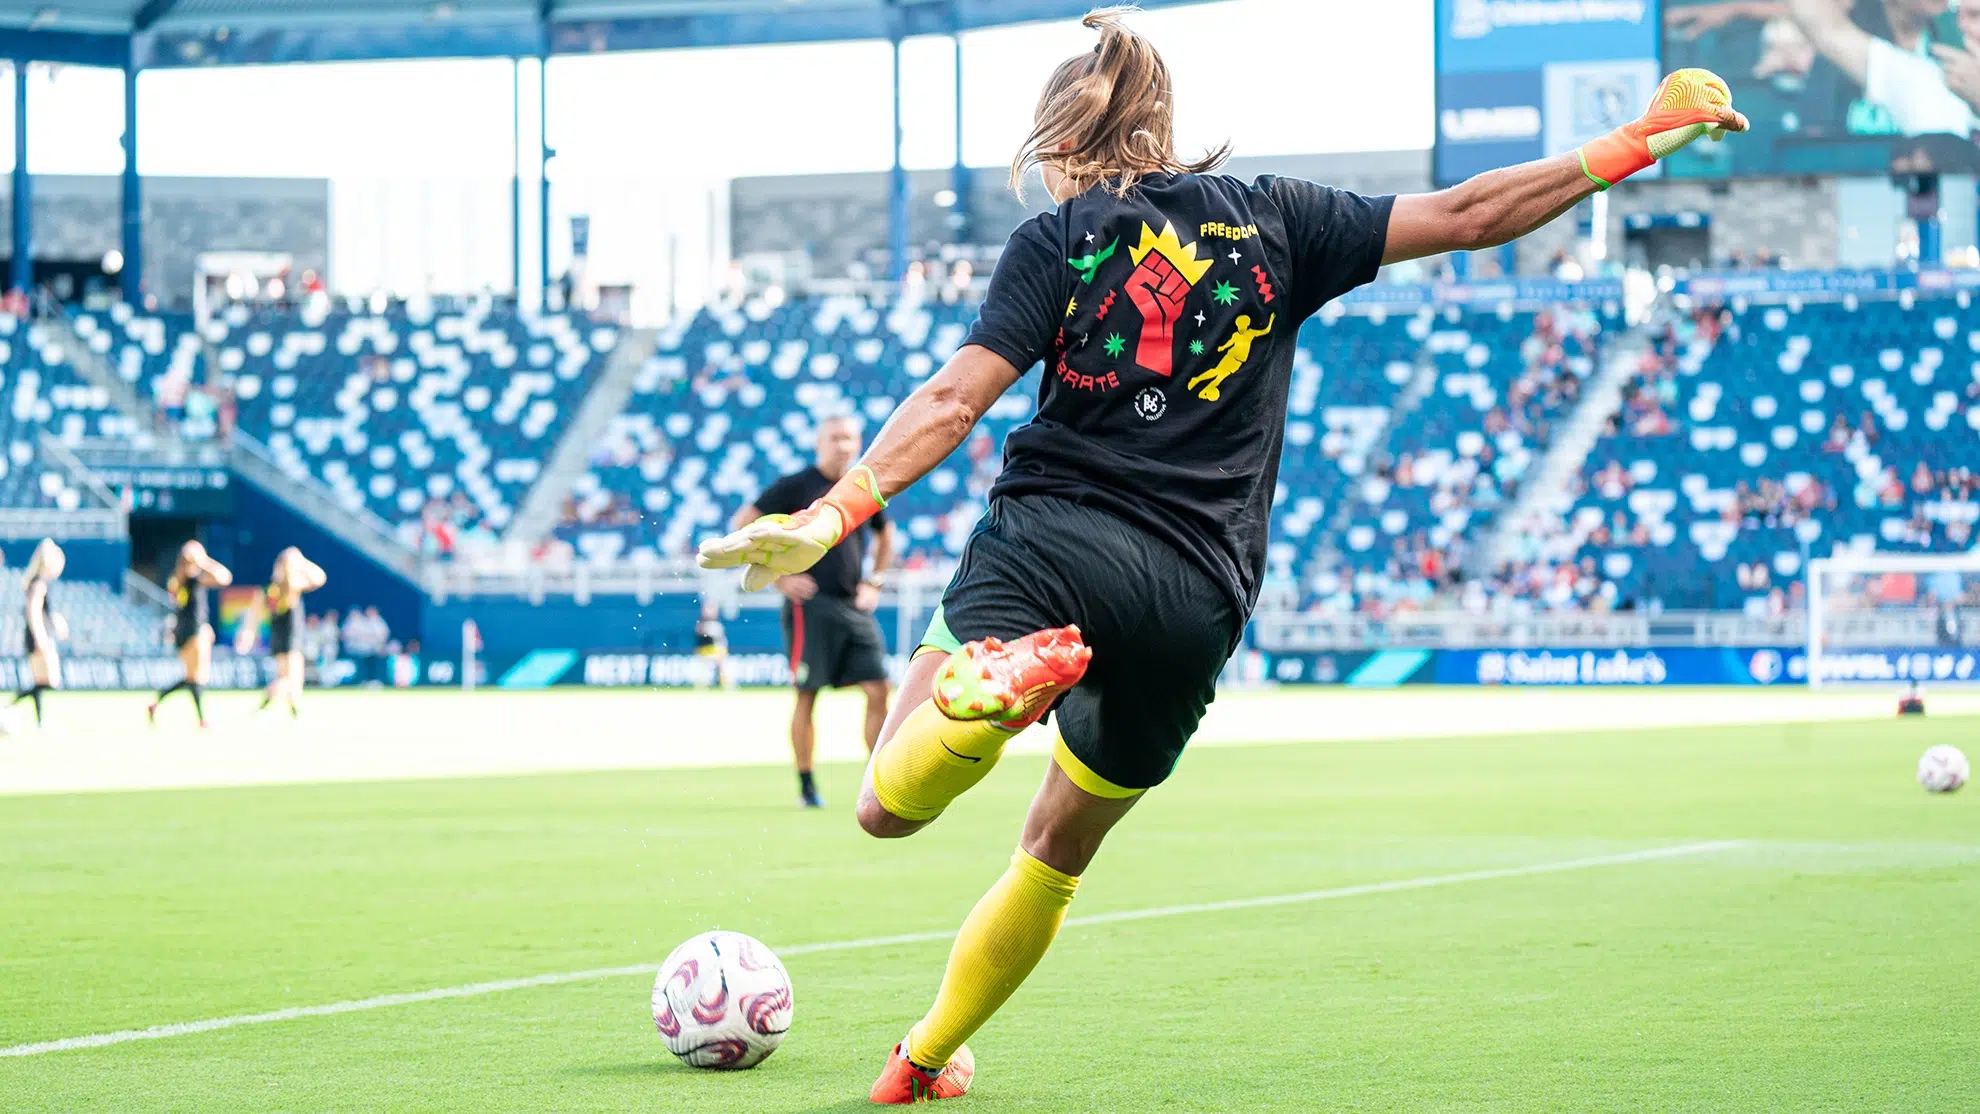 Aubrey Kingsbury winds up to kick a soccer ball while wearing a shirt from the Black Women's Player Coalition.